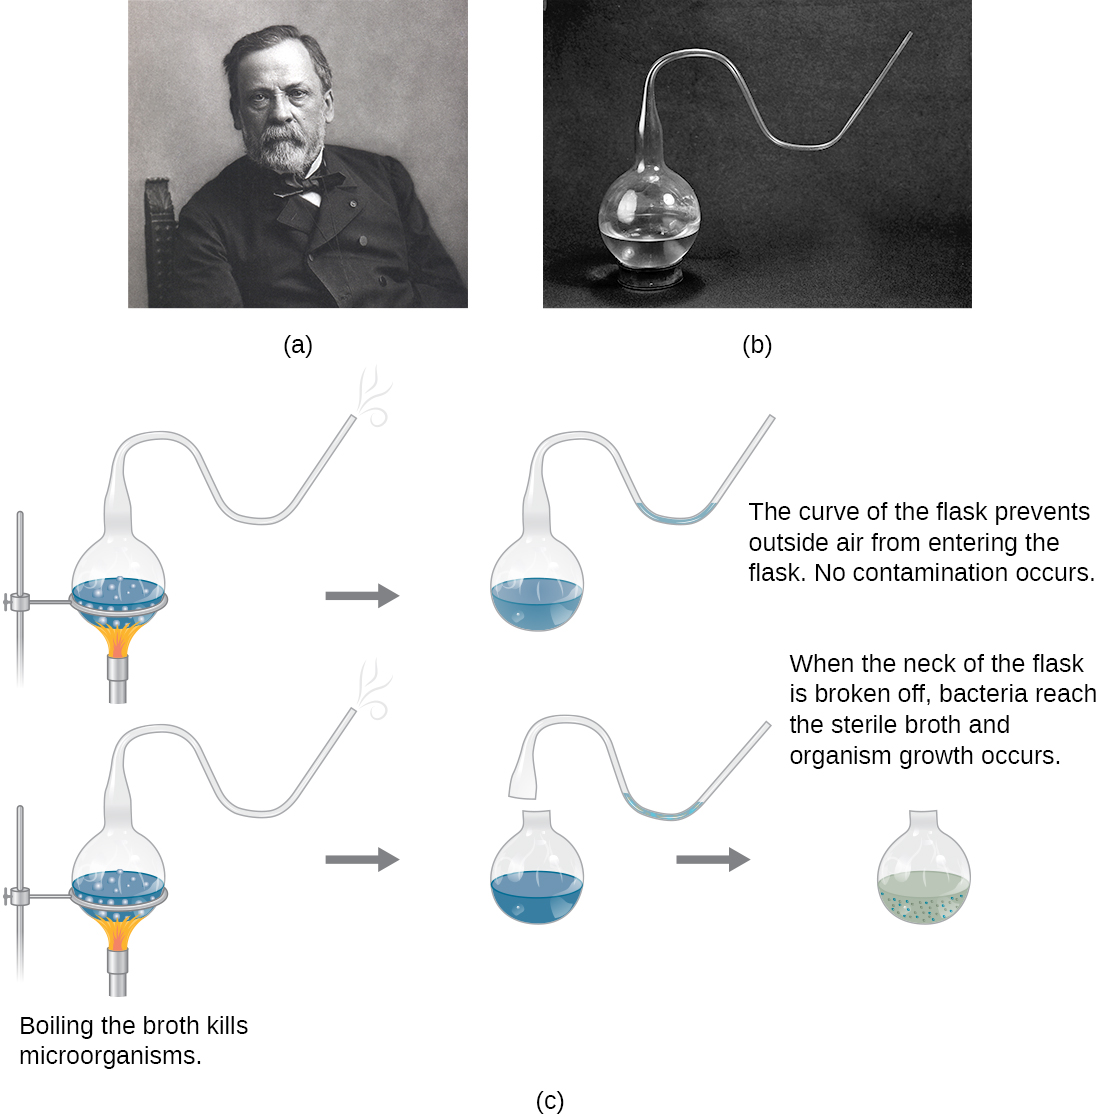 a) Photo of Louis Pasteur b) Photo of Pasteur’s flask – a round flask that is only opened to the outside through a long S-shaped tube. c) A drawing of Pasteur’s experiment. The top diagram shows the swan-neck flask from (b) containing broth that is being boiled to kill microorganisms in the broth. After the boiling process the cooled flask remains sterile because the curve of the flask prevents outside air from entering the flask. So, no contamination occurs. The bottom diagram shows the same flask being boiled. Next, the swan-neck is removed and the flask is opened to the environment. When the neck of the flask is broken off, bacteria reach the sterile broth and organism growth occurs. This is seen as cloudiness in the broth.